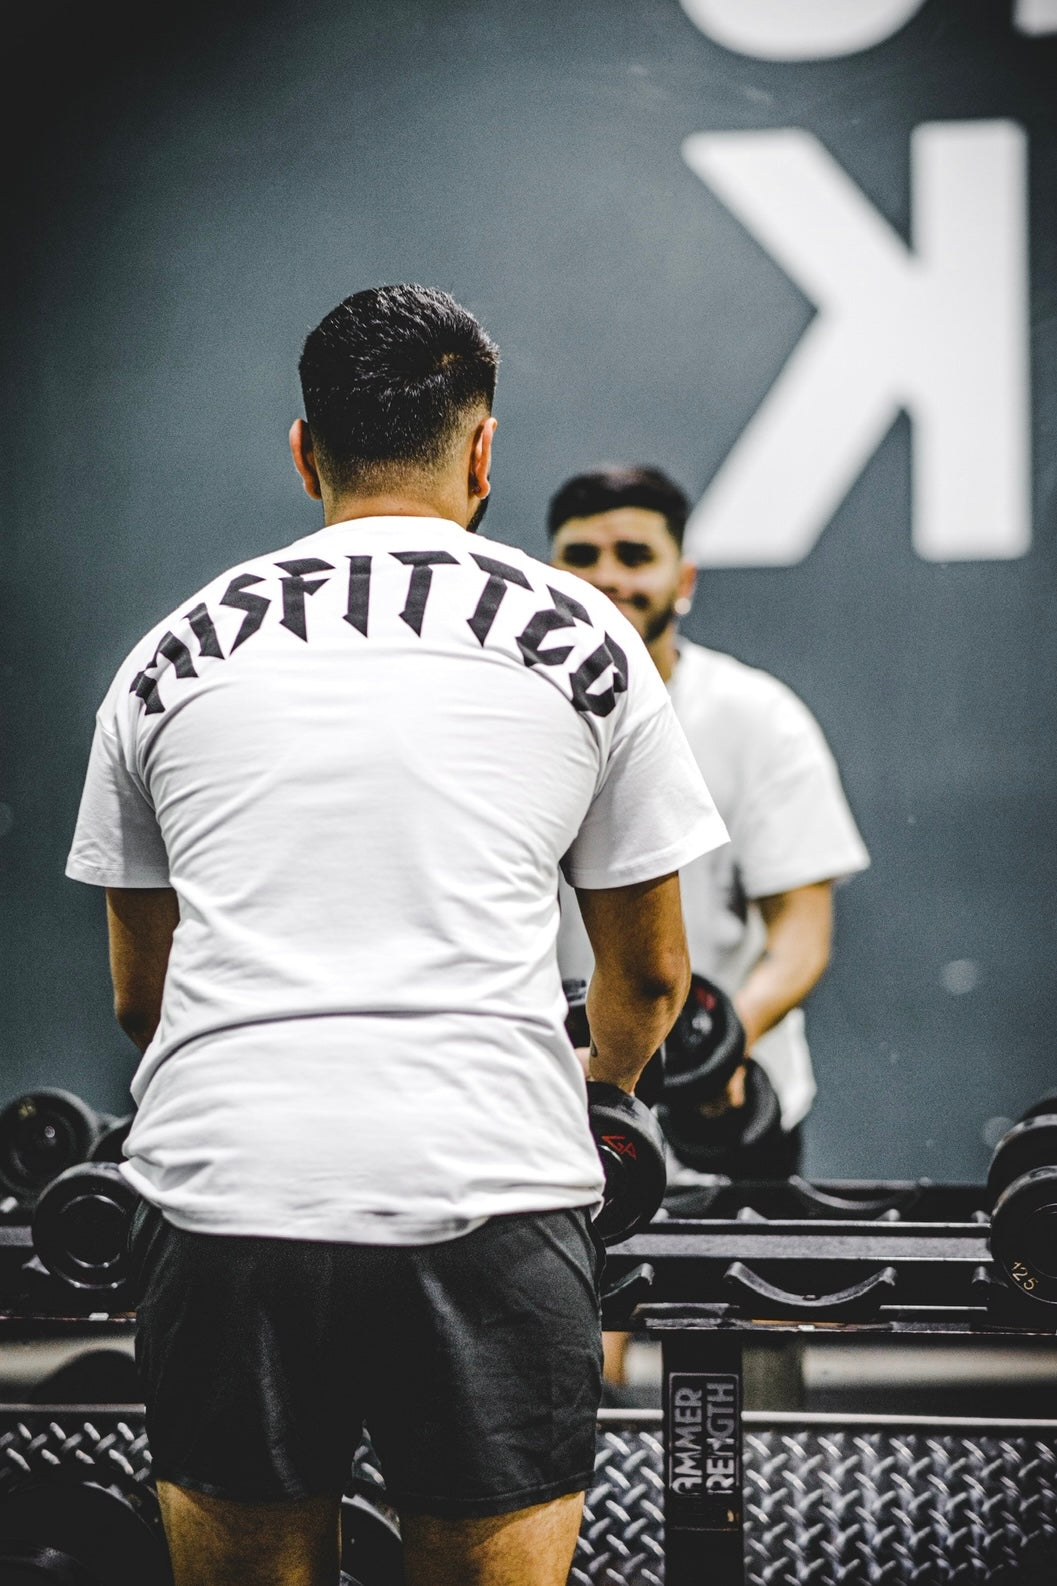 Misfitted Apparel Tee - White